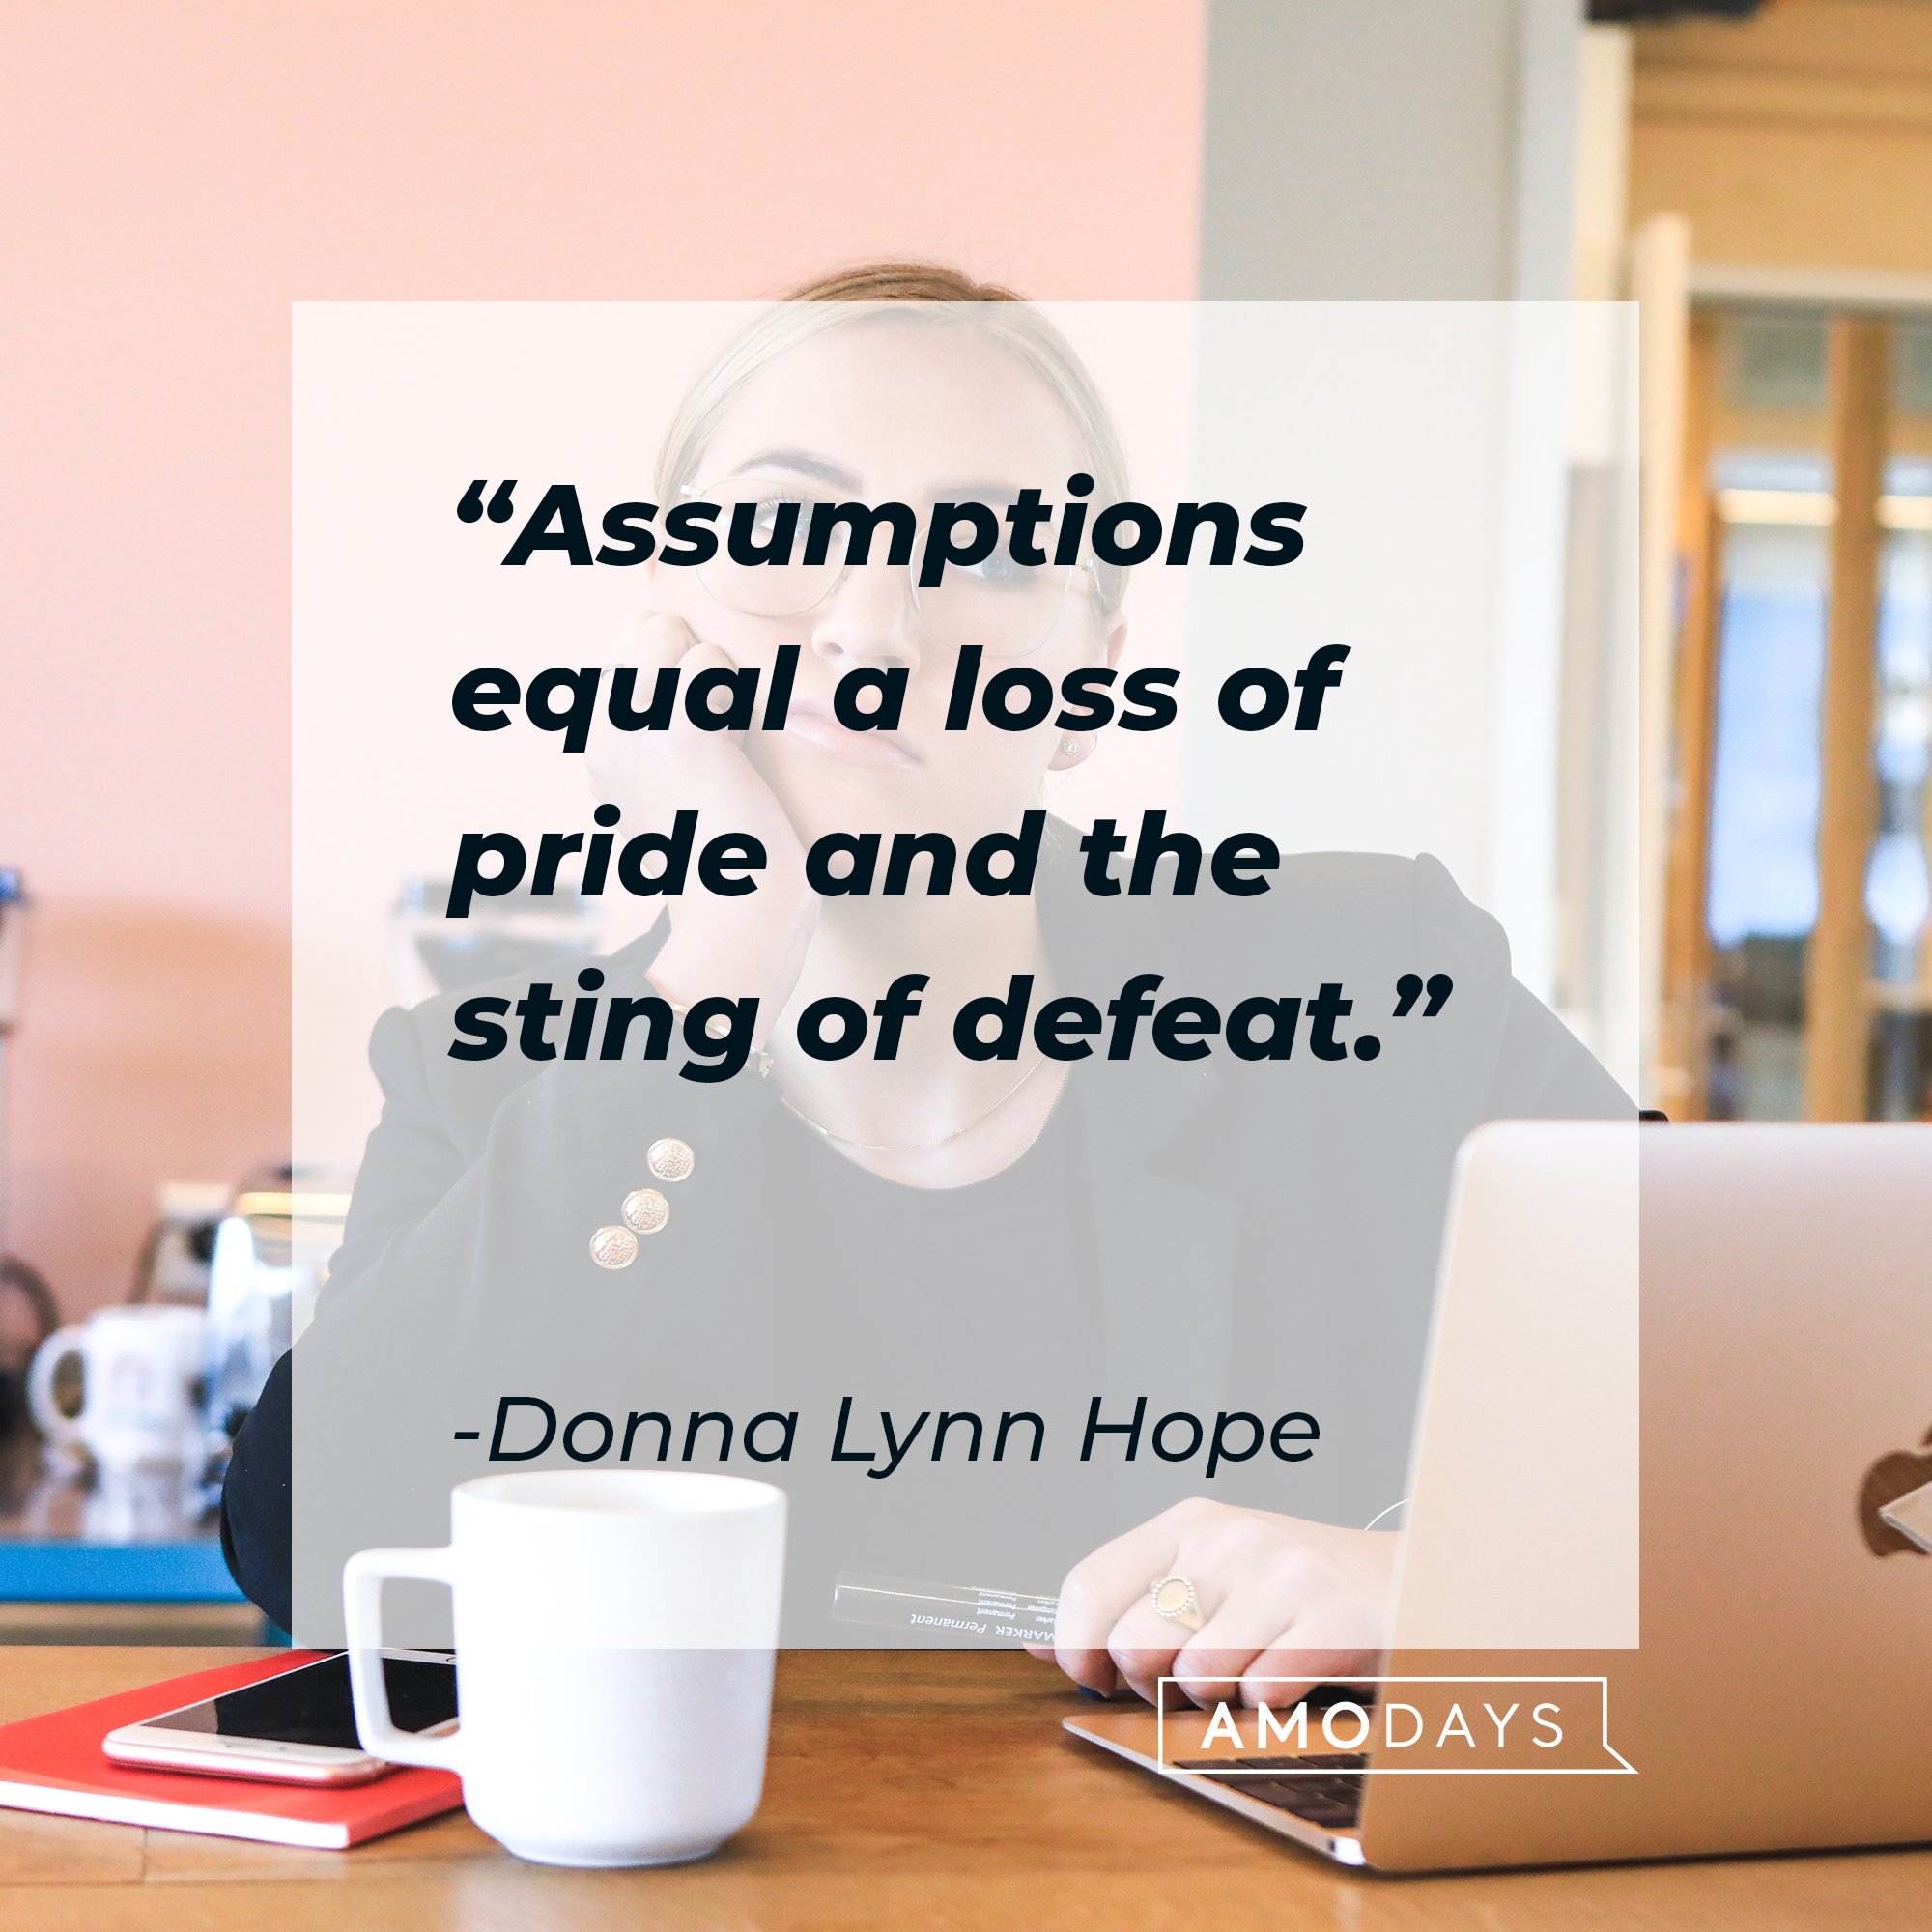 Donna Lynn Hope’s quote: "Assumptions equal a loss of pride and the sting of defeat." | Image: AmoDays 